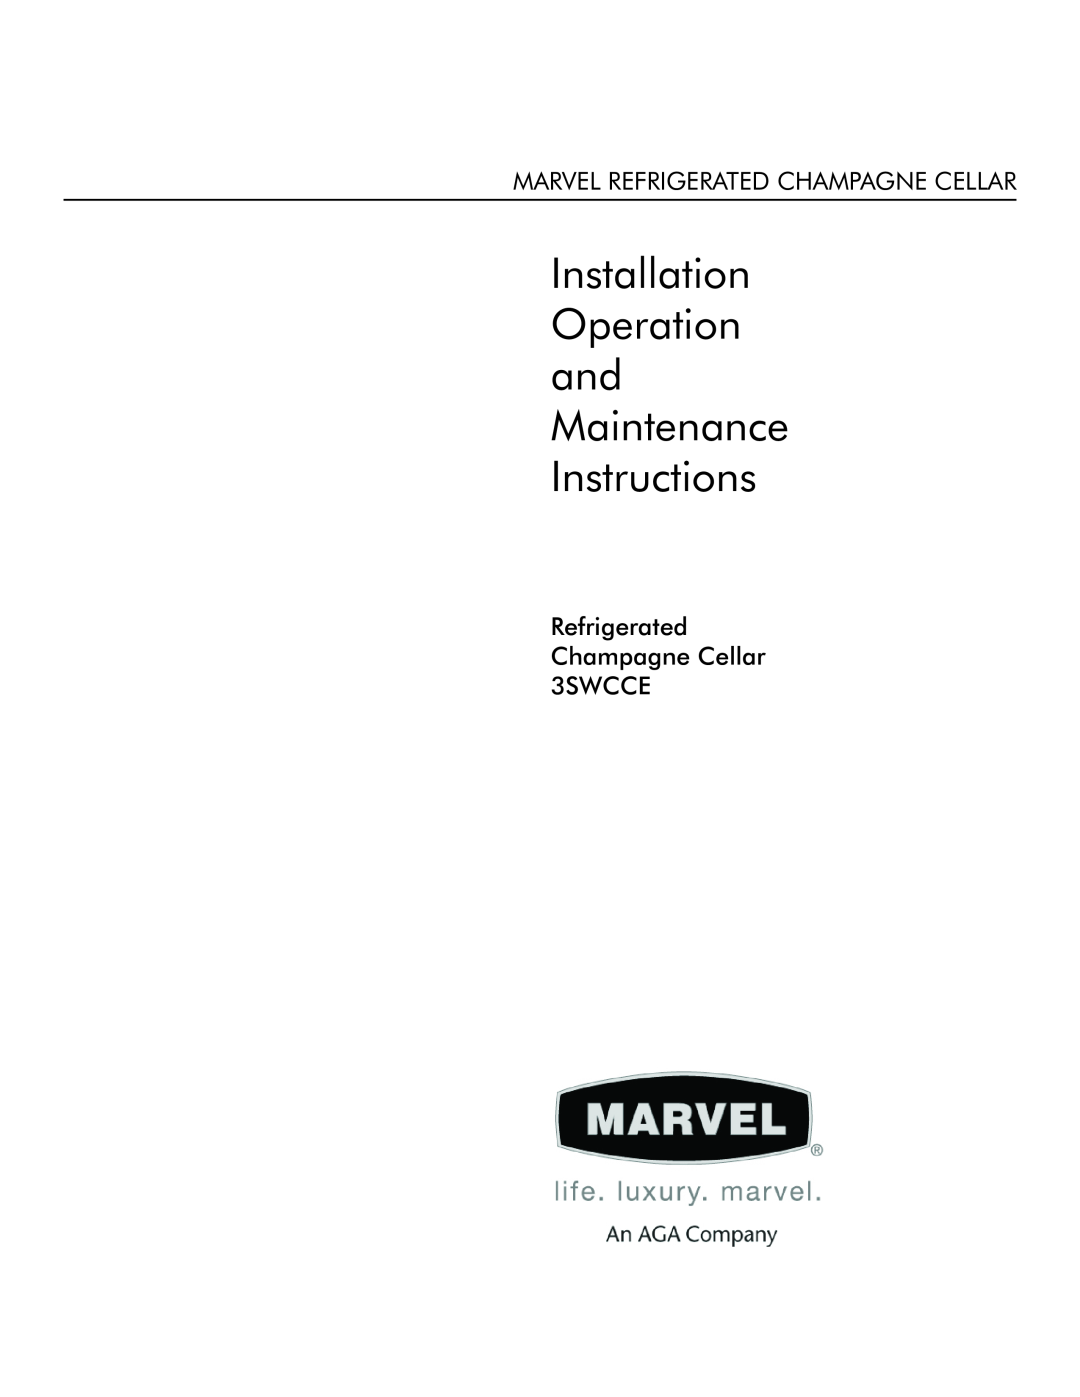 Marvel Industries manual Refrigerated Champagne Cellar 3SWCCE, Marvel Refrigerated Champagne Cellar 